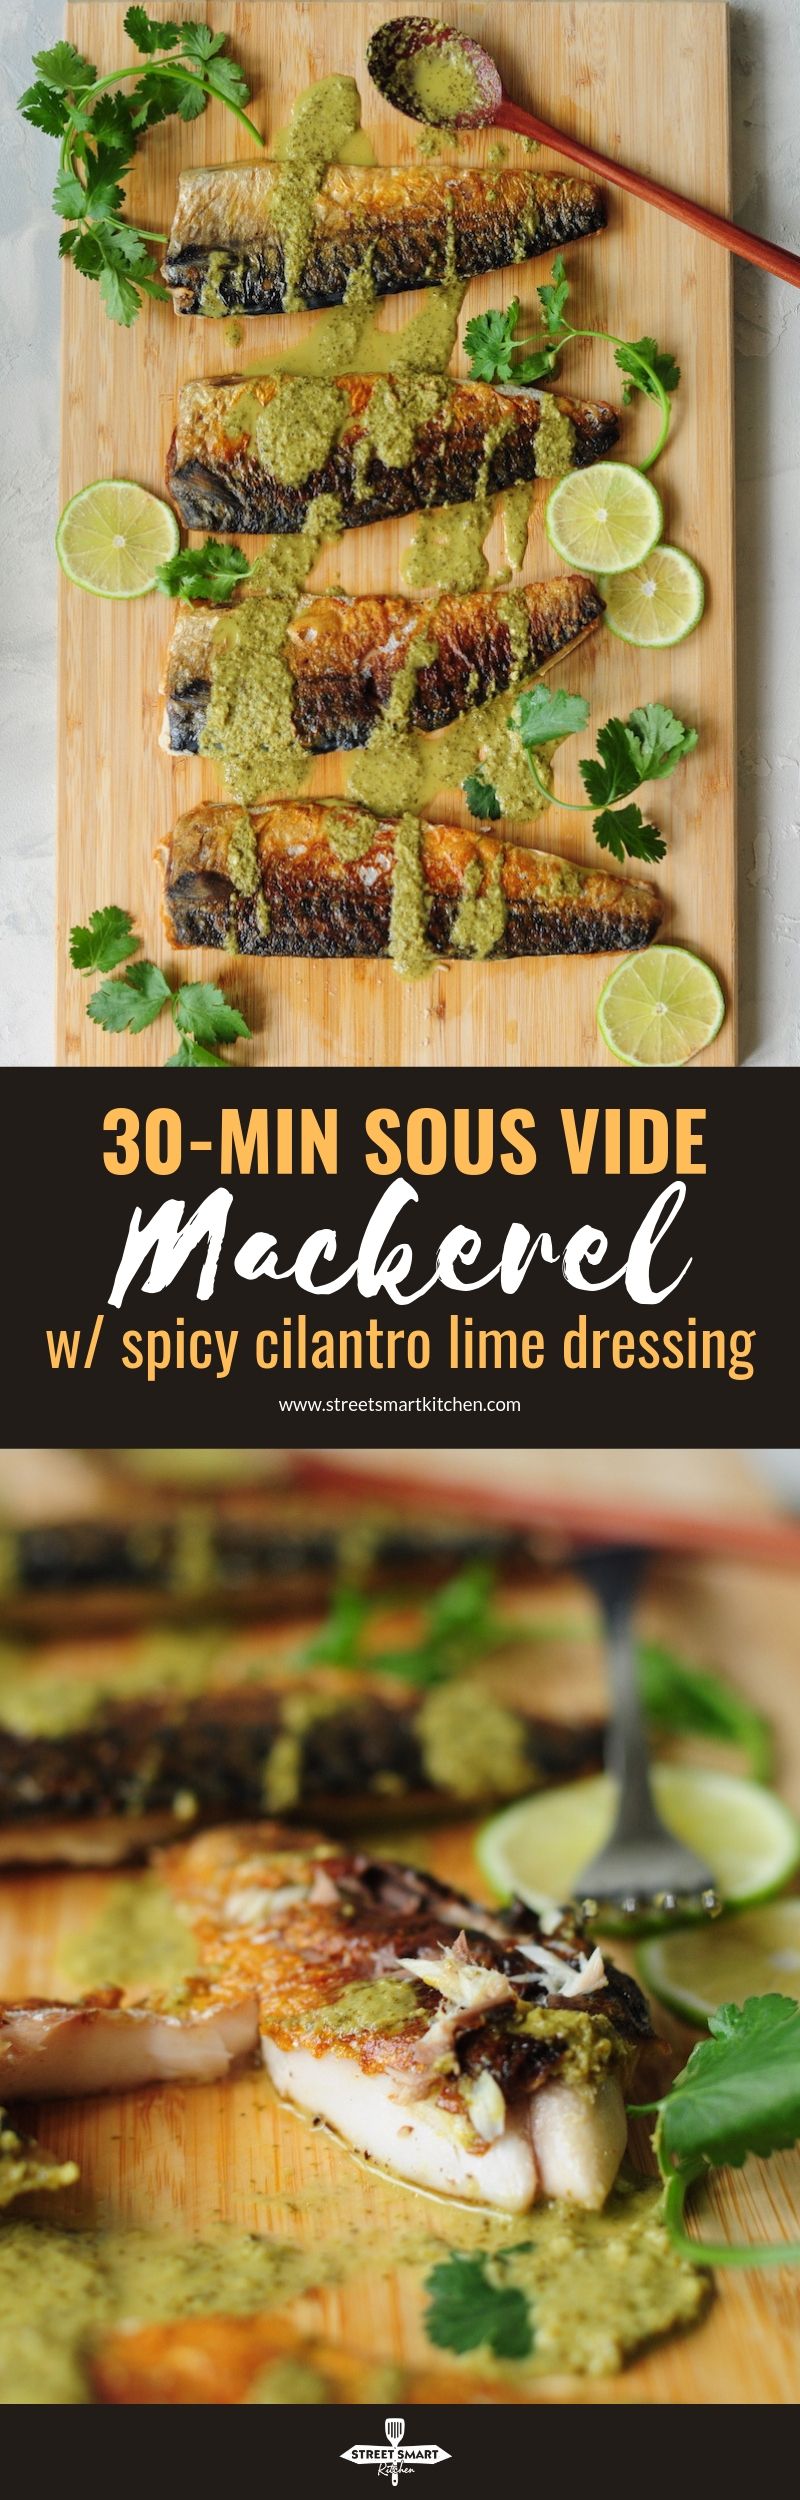 30-minute sous vide mackerel recipe drizzled with a homemade spicy cilantro lime dressing, it makes a quick and easy workday dinner.